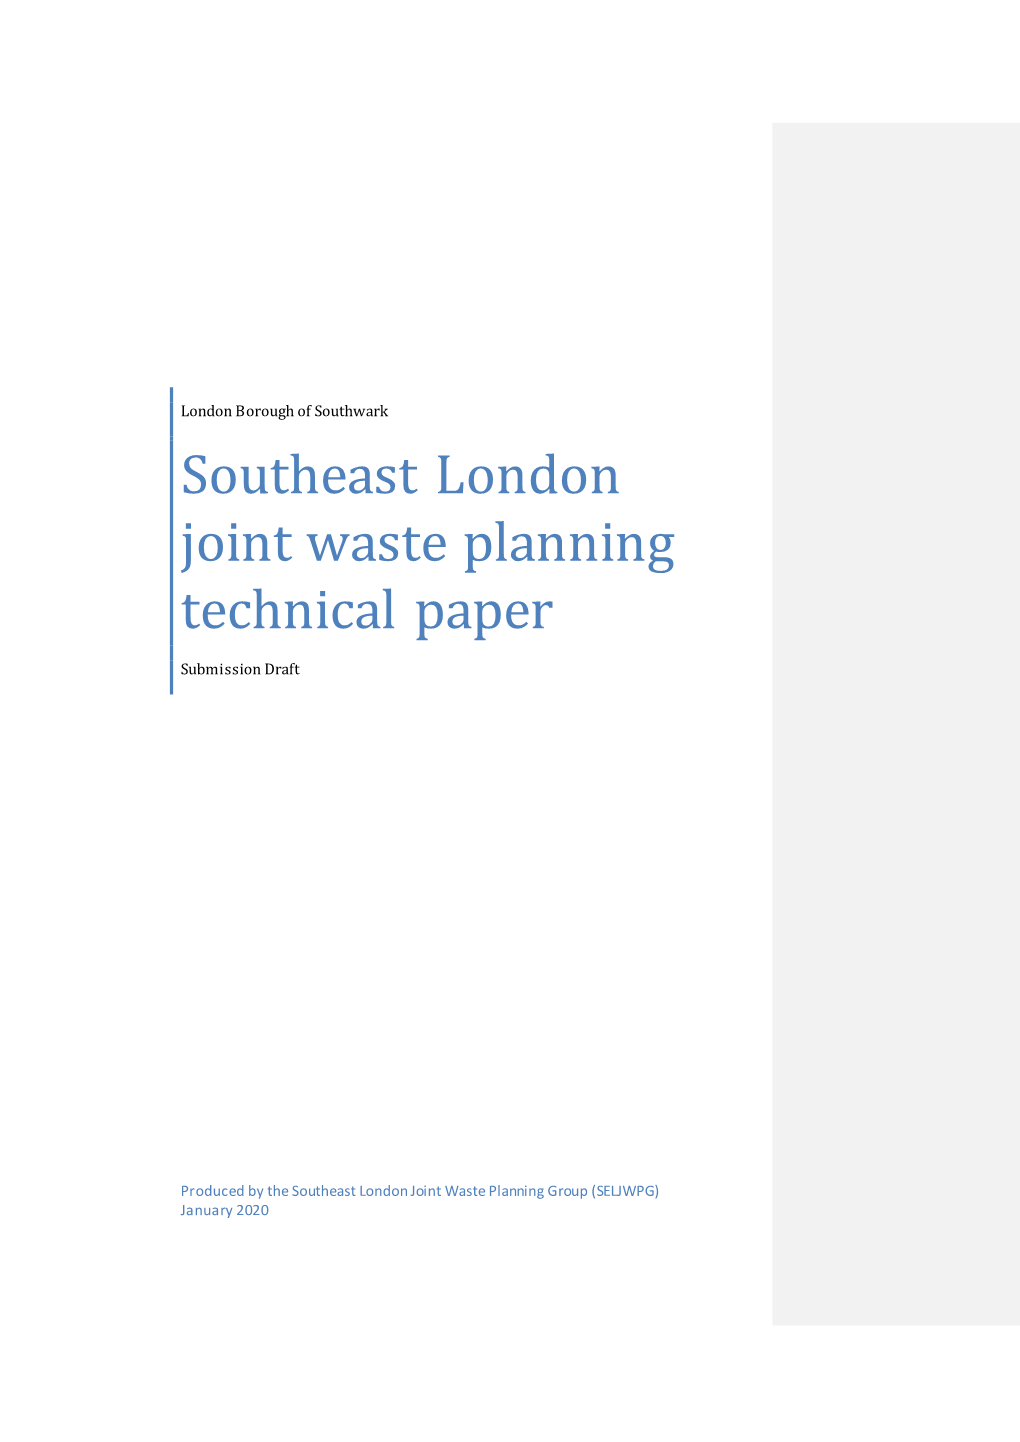 Southeast London Joint Waste Planning Technical Paper